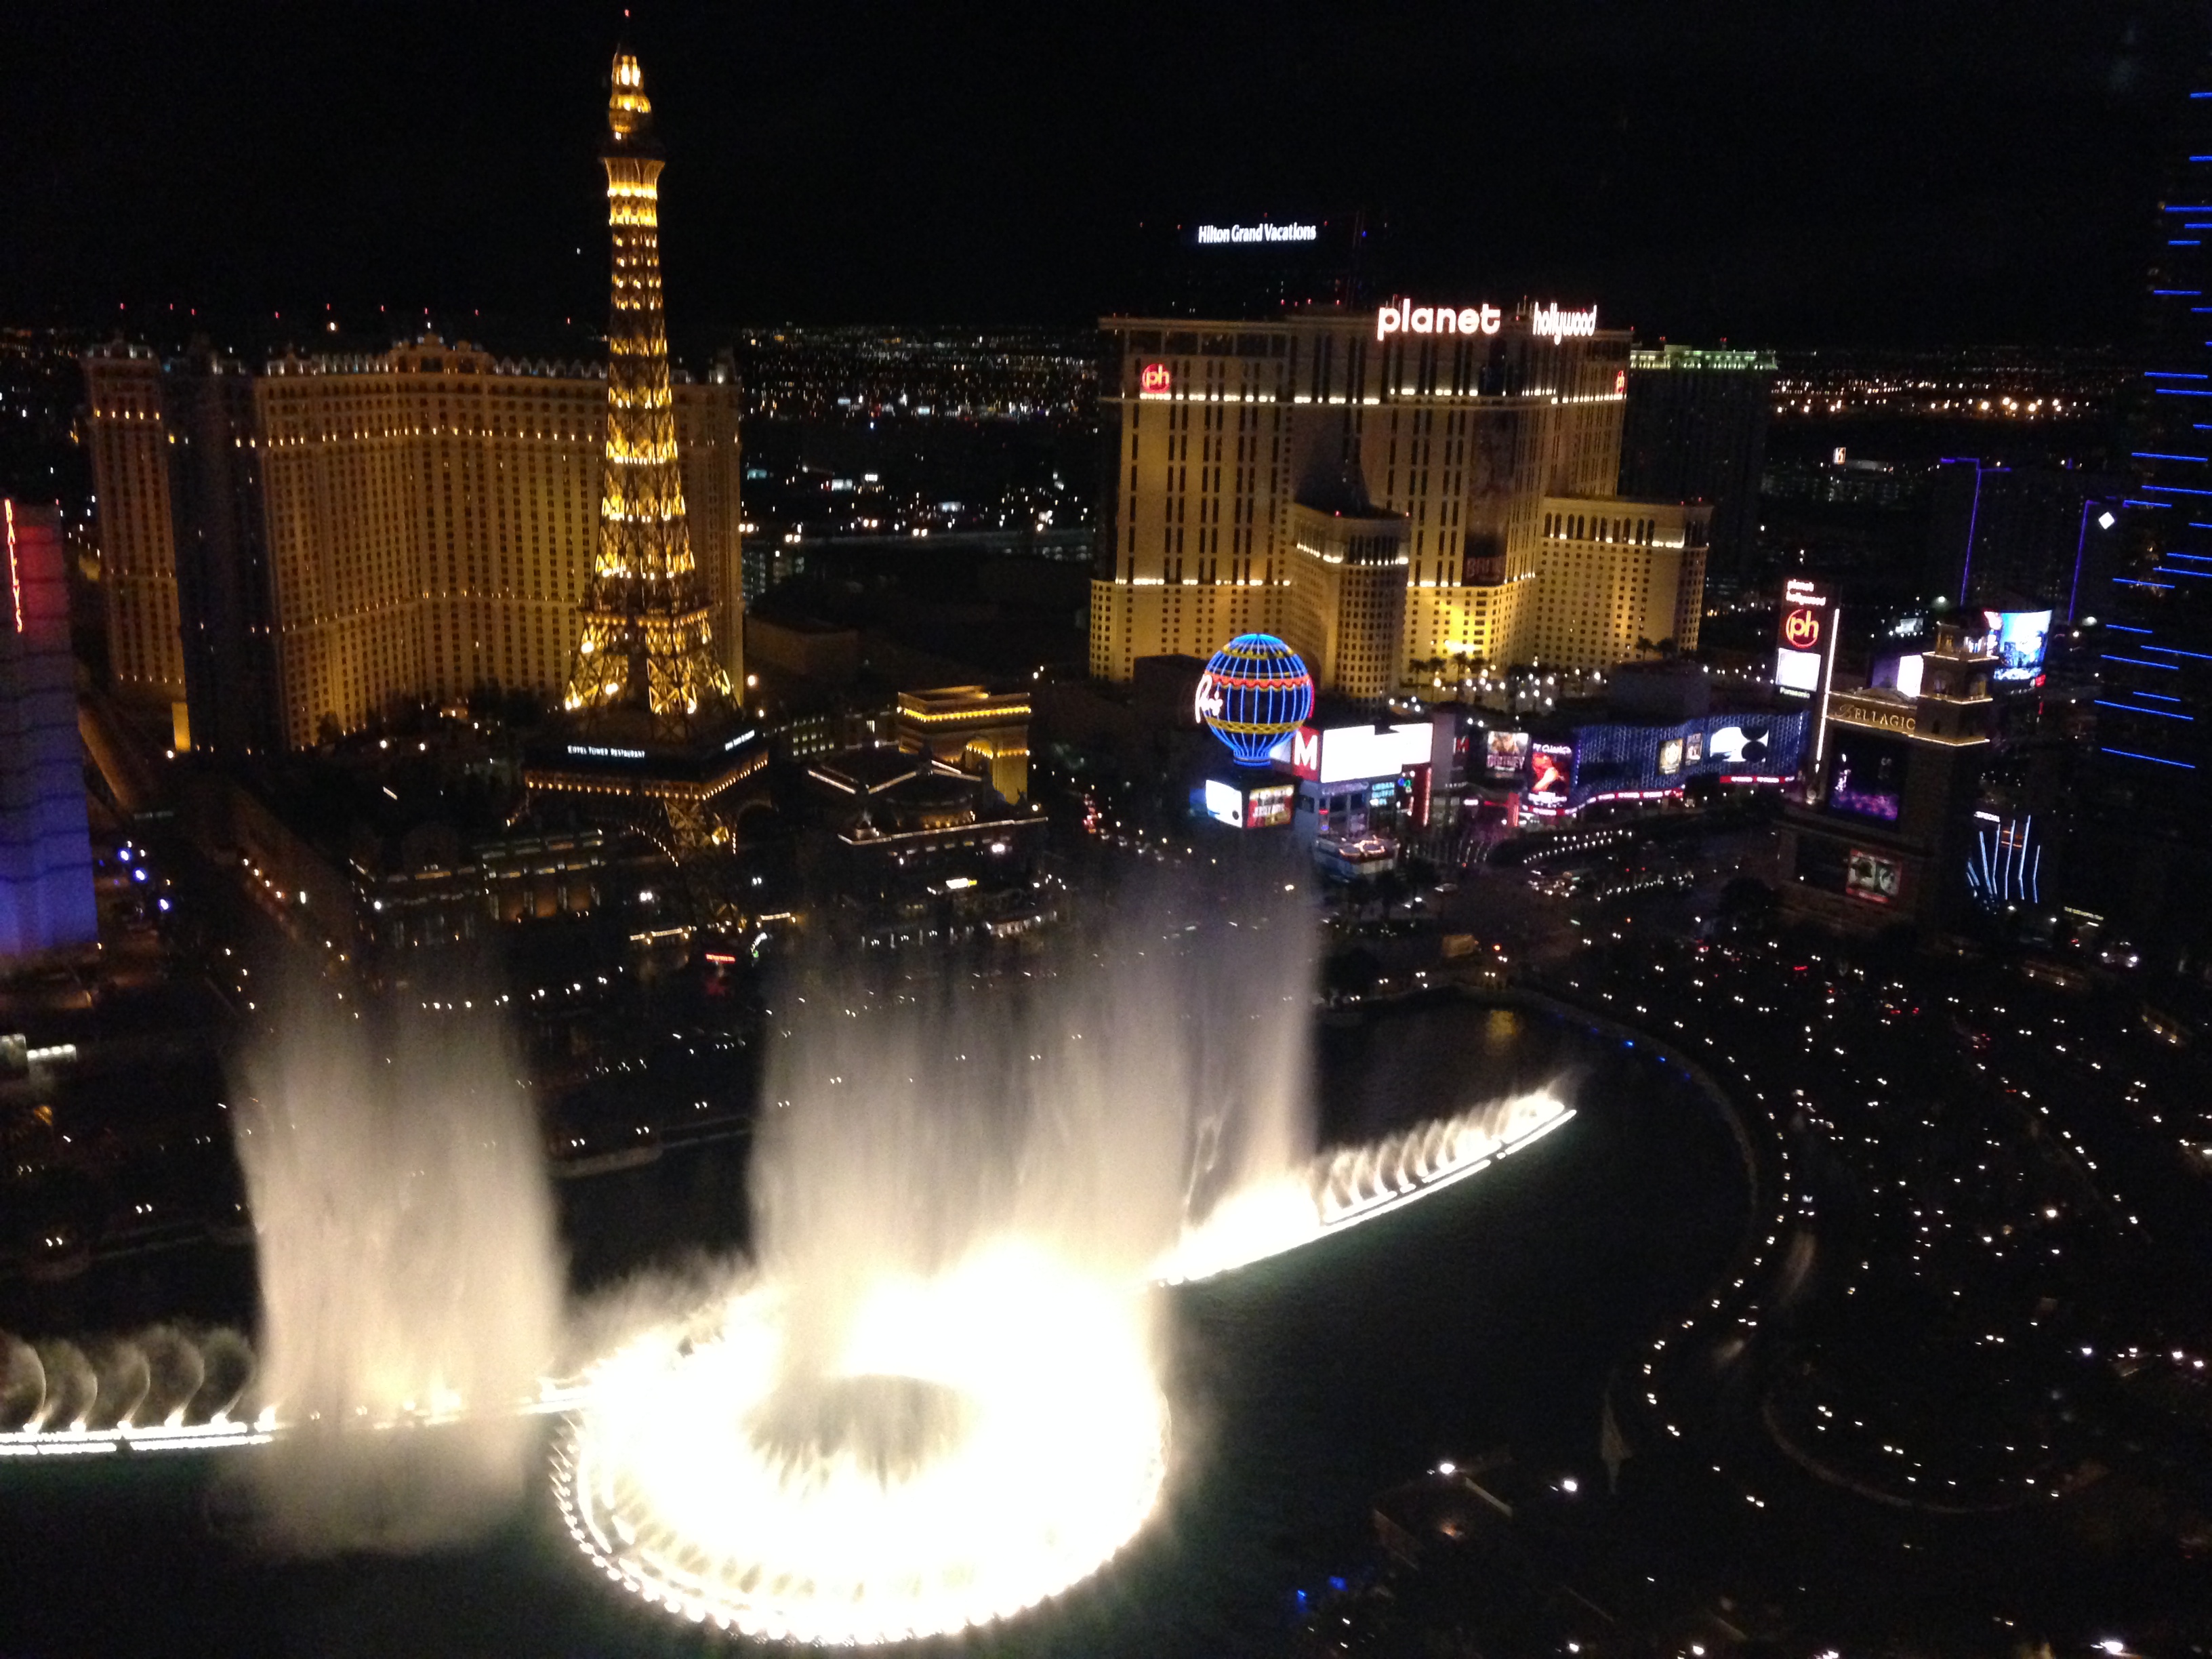 view from the Bellagio